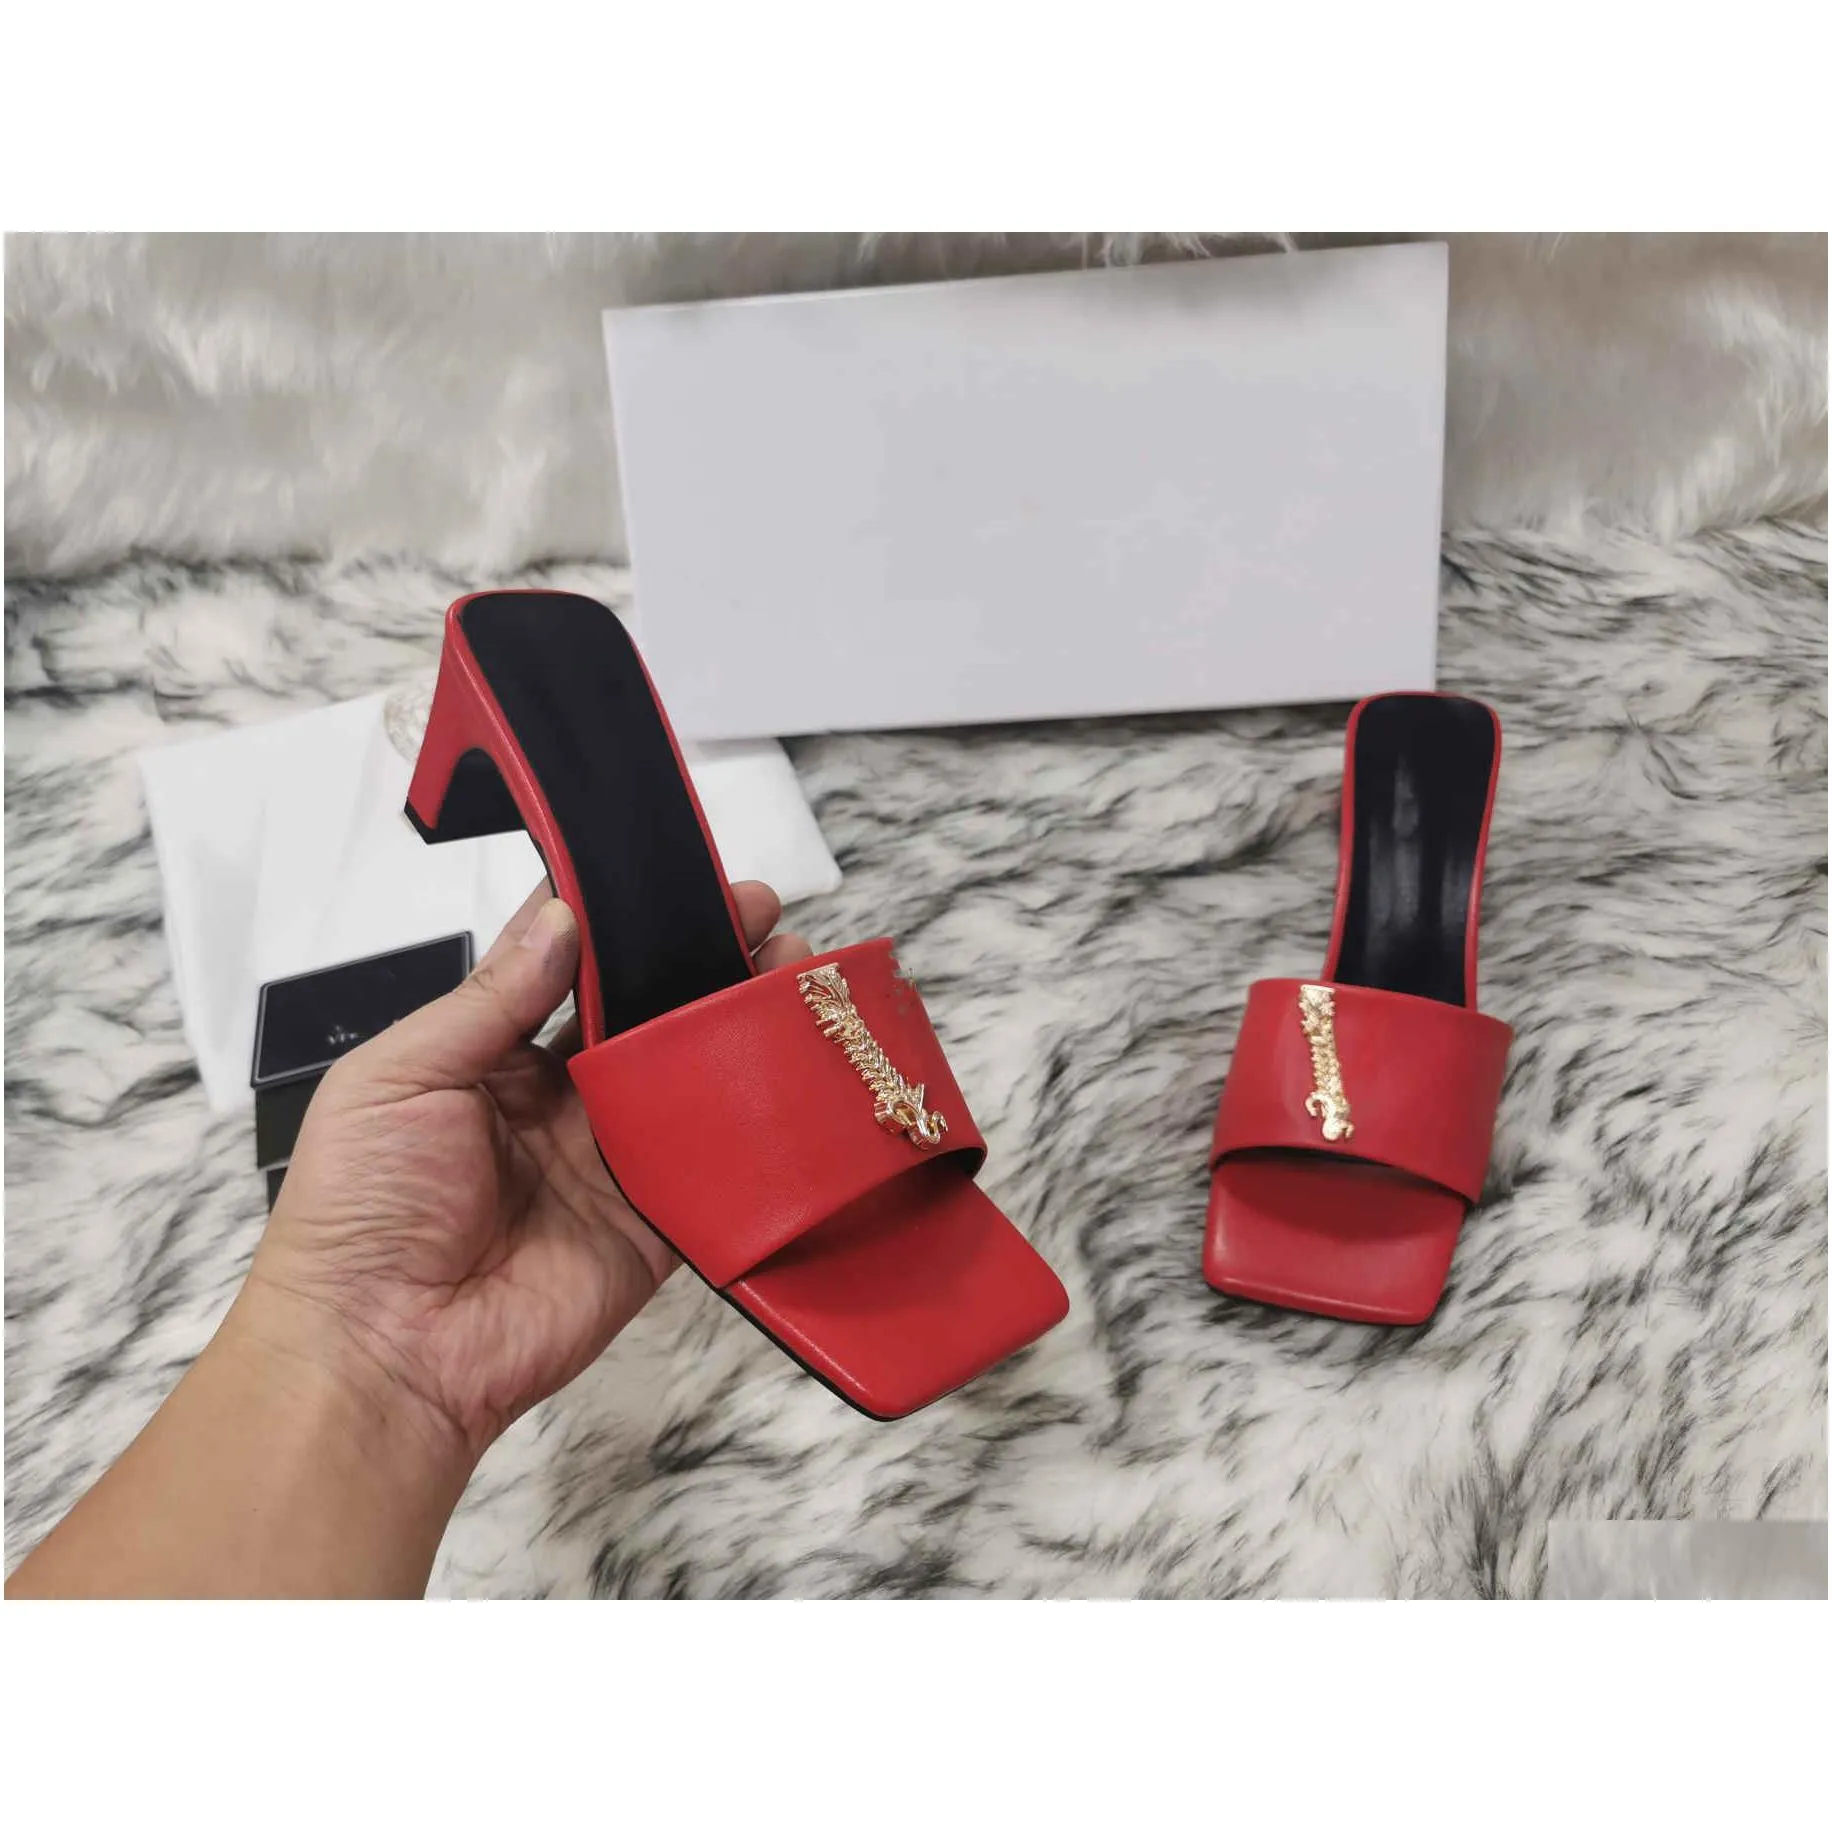 the v-button thick-heeled slippers say goodbye to drab rough beautiful and comfortable fashion and trend with a height of 6cm. size 35-43 with